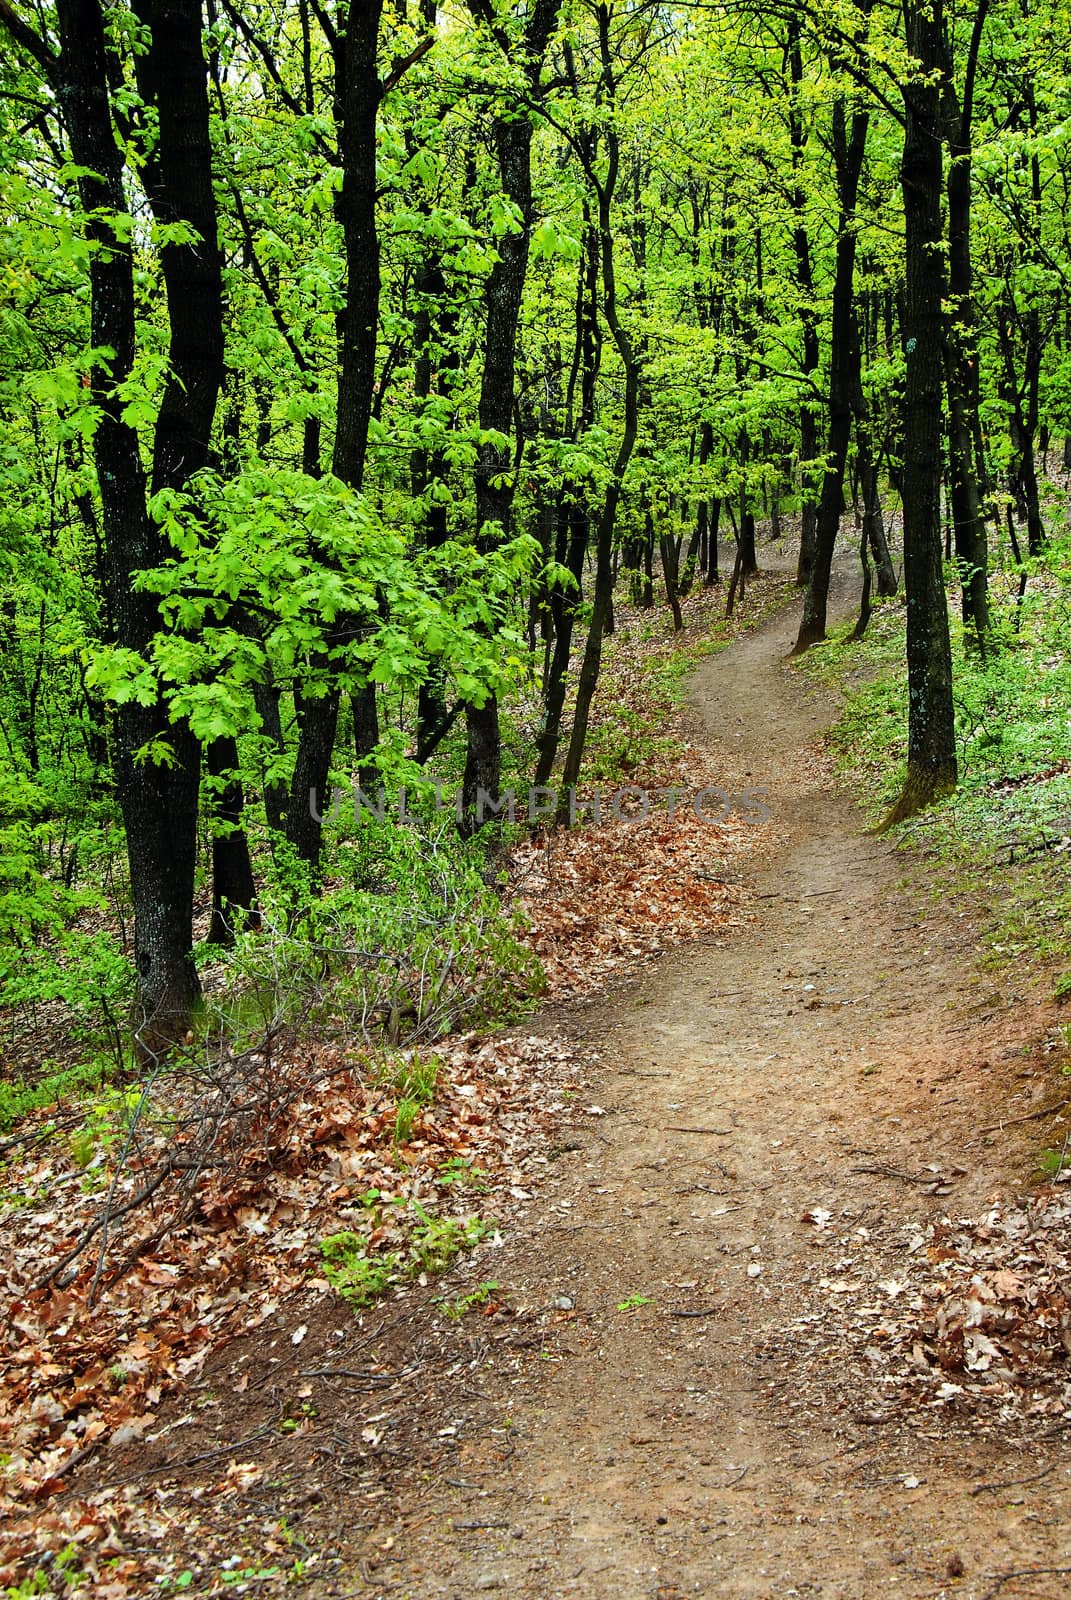 scenic path between green trees in forest